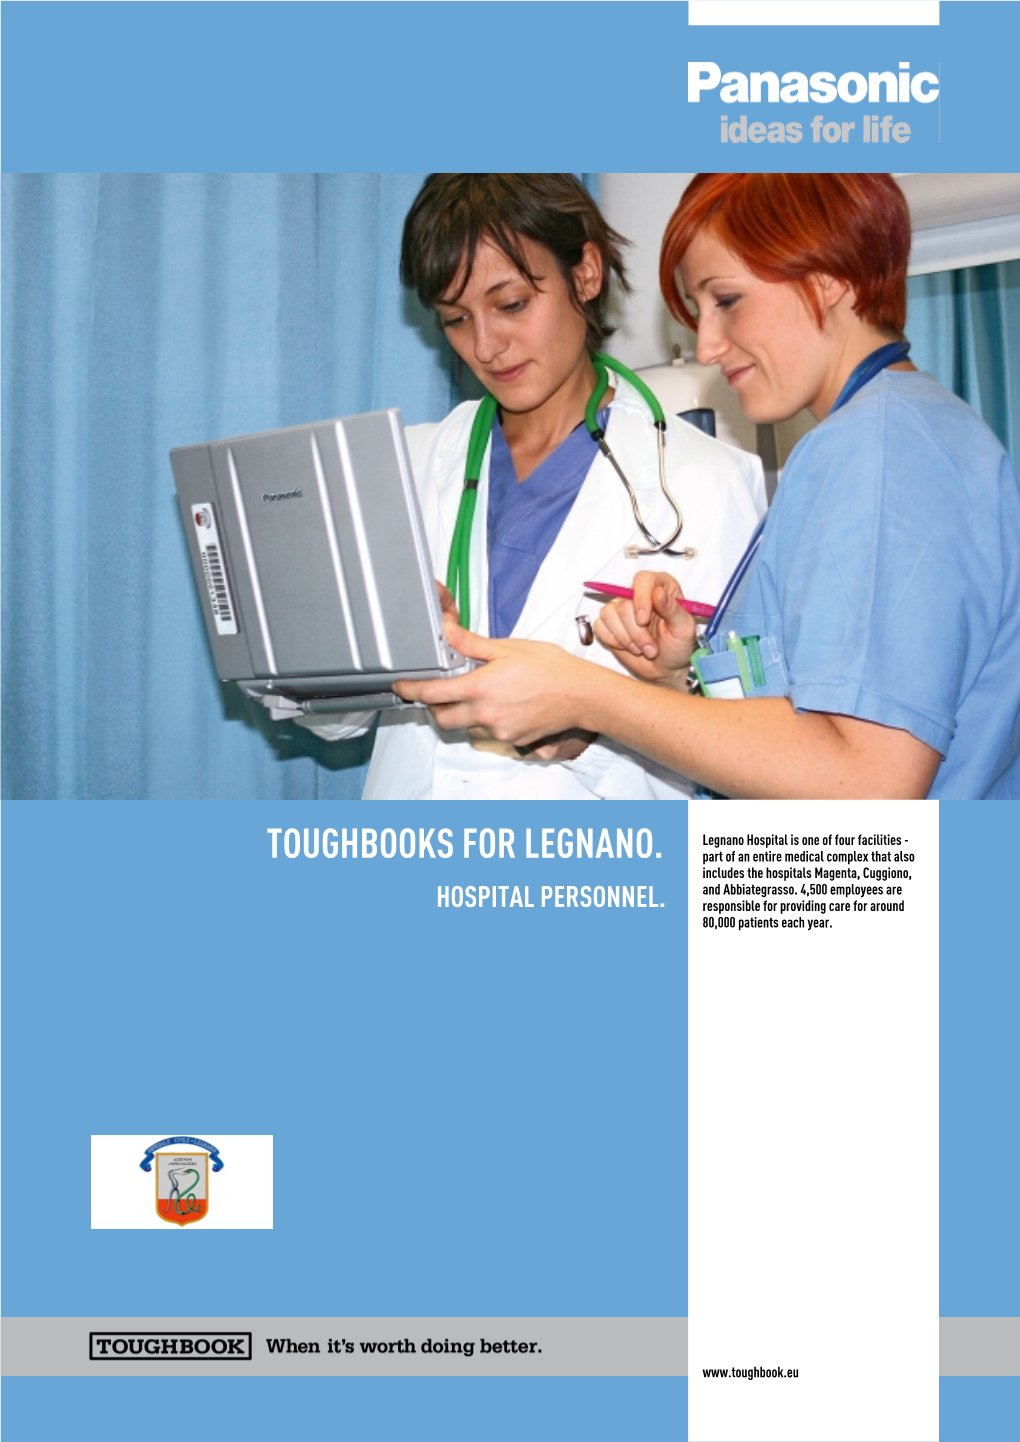 TOUGHBOOKS for LEGNANO. Part of an Entire Medical Complex That Also Includes the Hospitals Magenta, Cuggiono, and Abbiategrasso